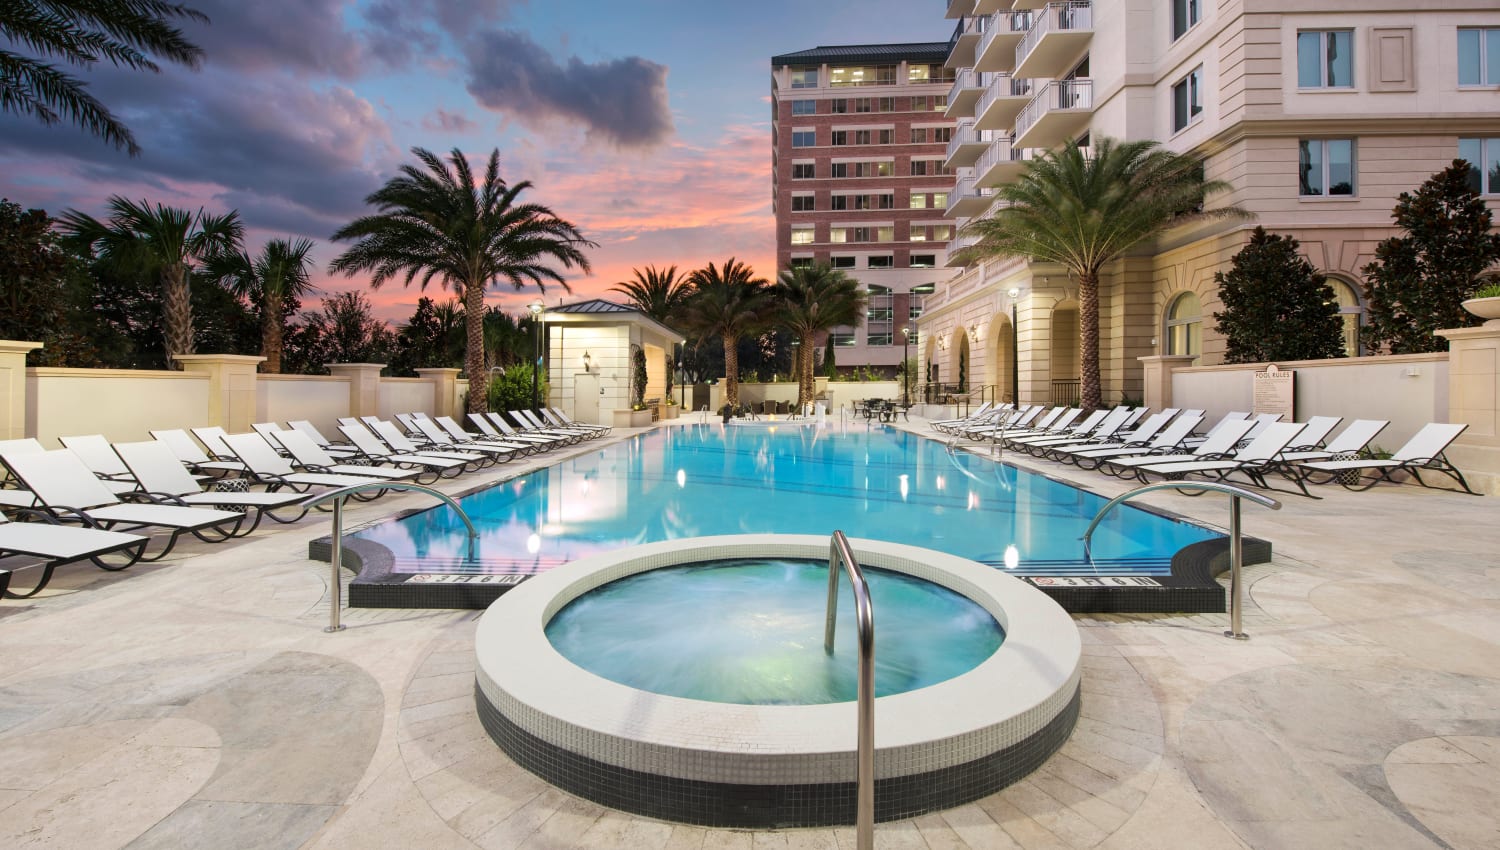 Spa and pool area at twilight at Olympus Harbour Island in Tampa, Florida